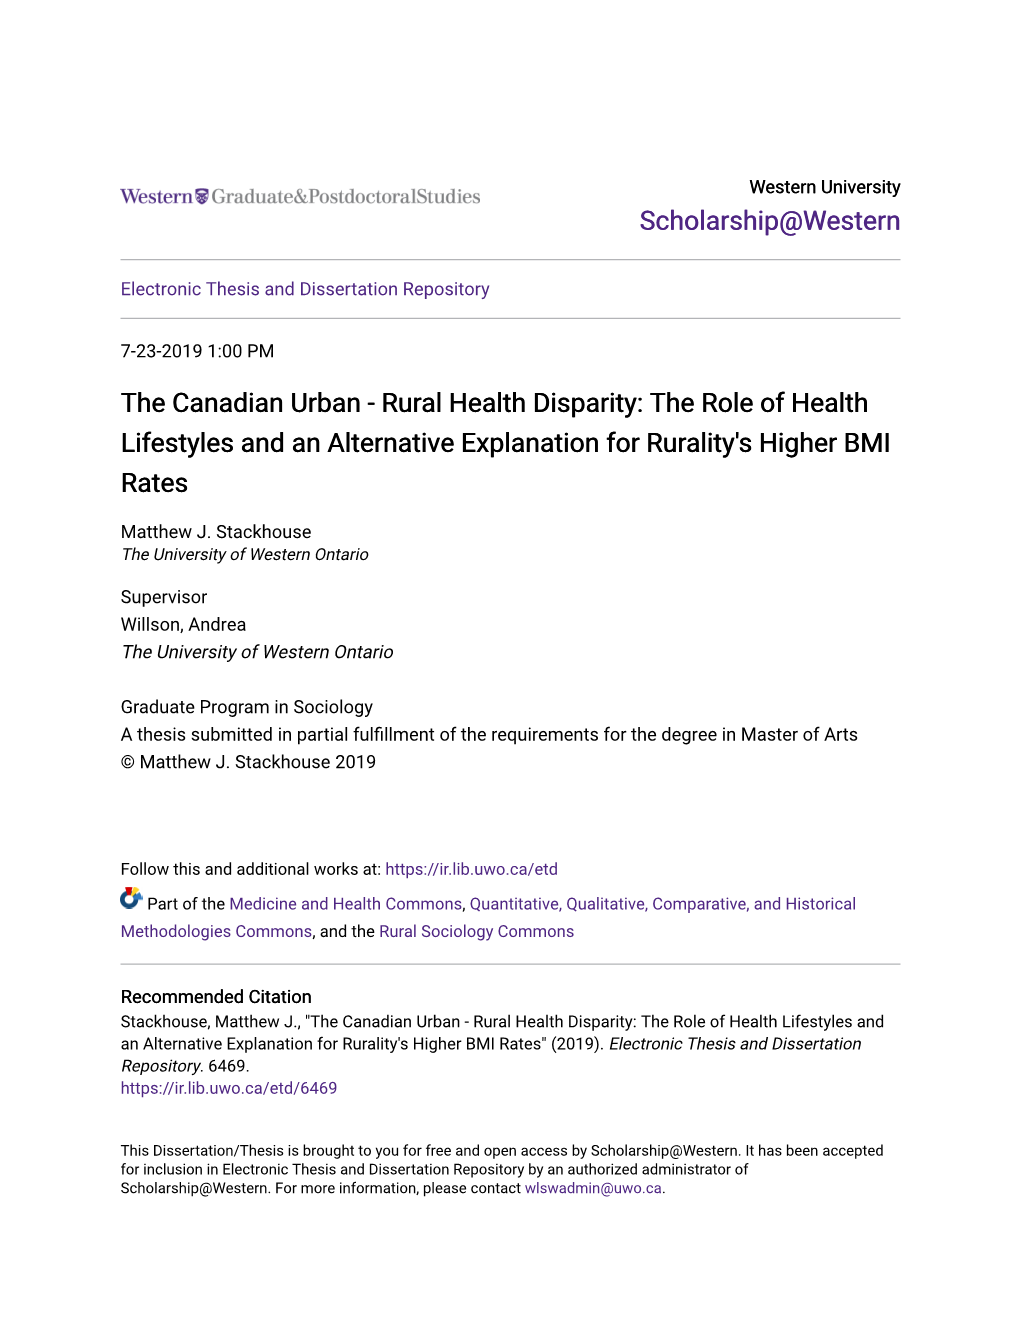 The Canadian Urban - Rural Health Disparity: the Role of Health Lifestyles and an Alternative Explanation for Rurality's Higher BMI Rates